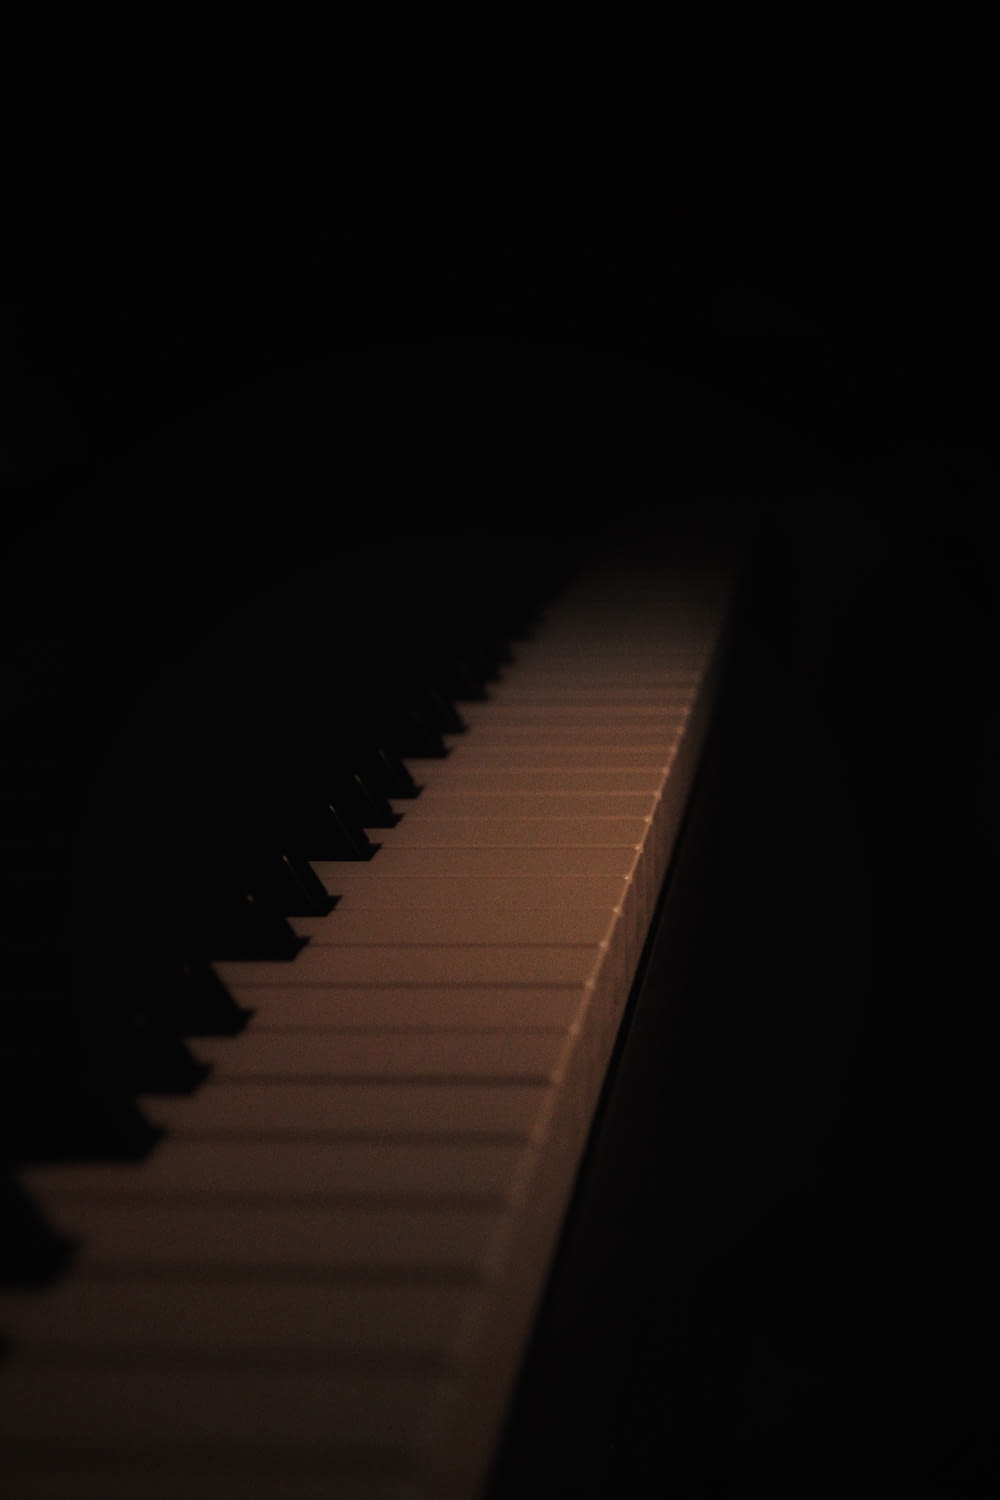 a close up of a piano keyboard in the dark